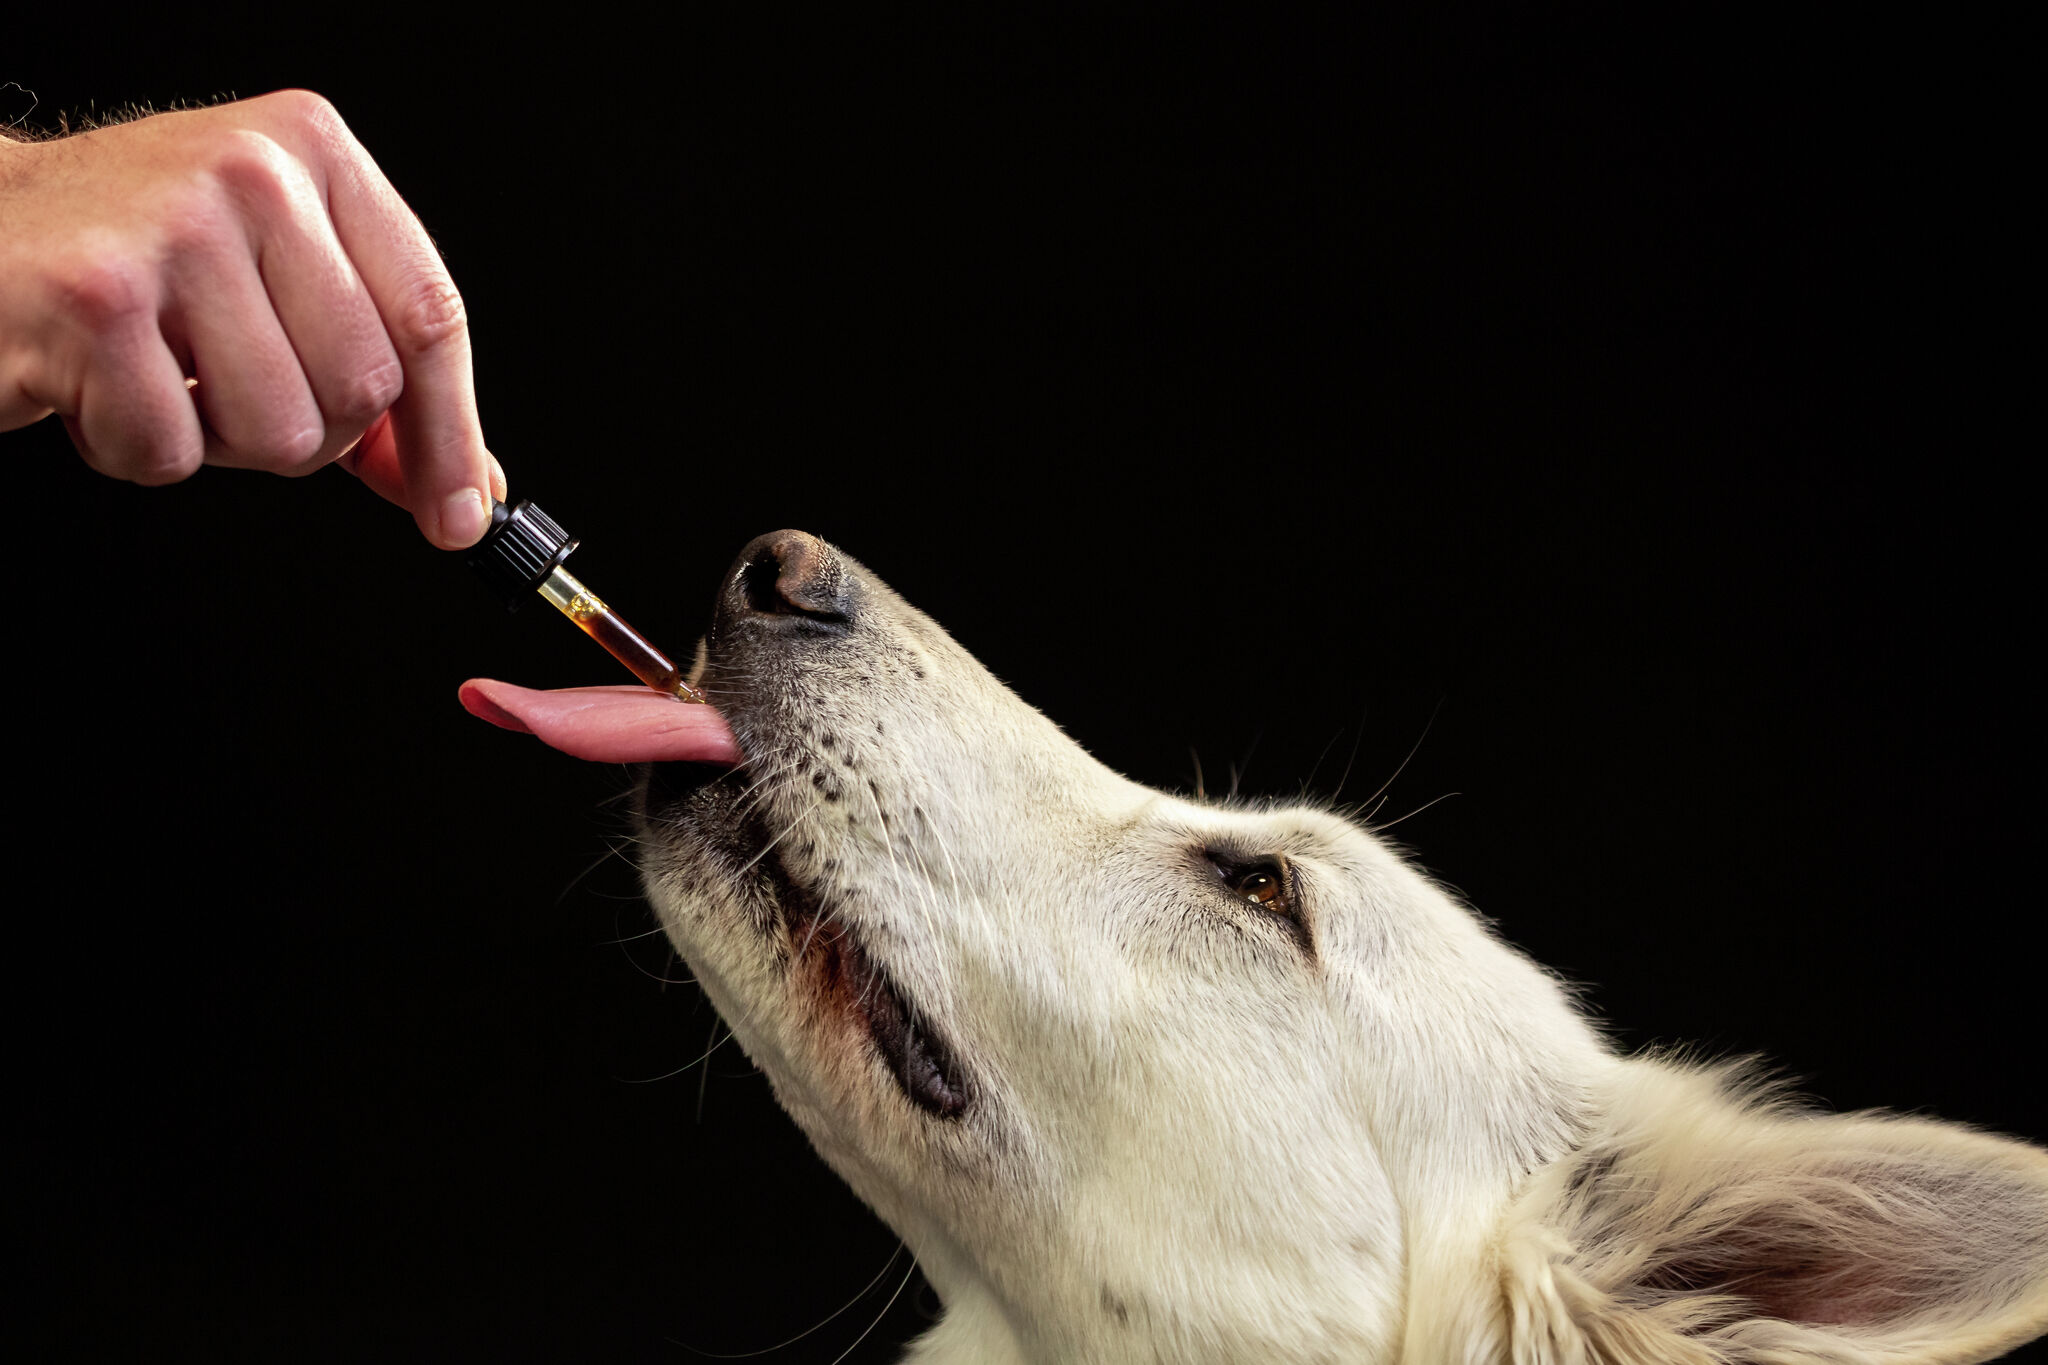 CBD, hemp products can help pets with pain, mobility, anxiety